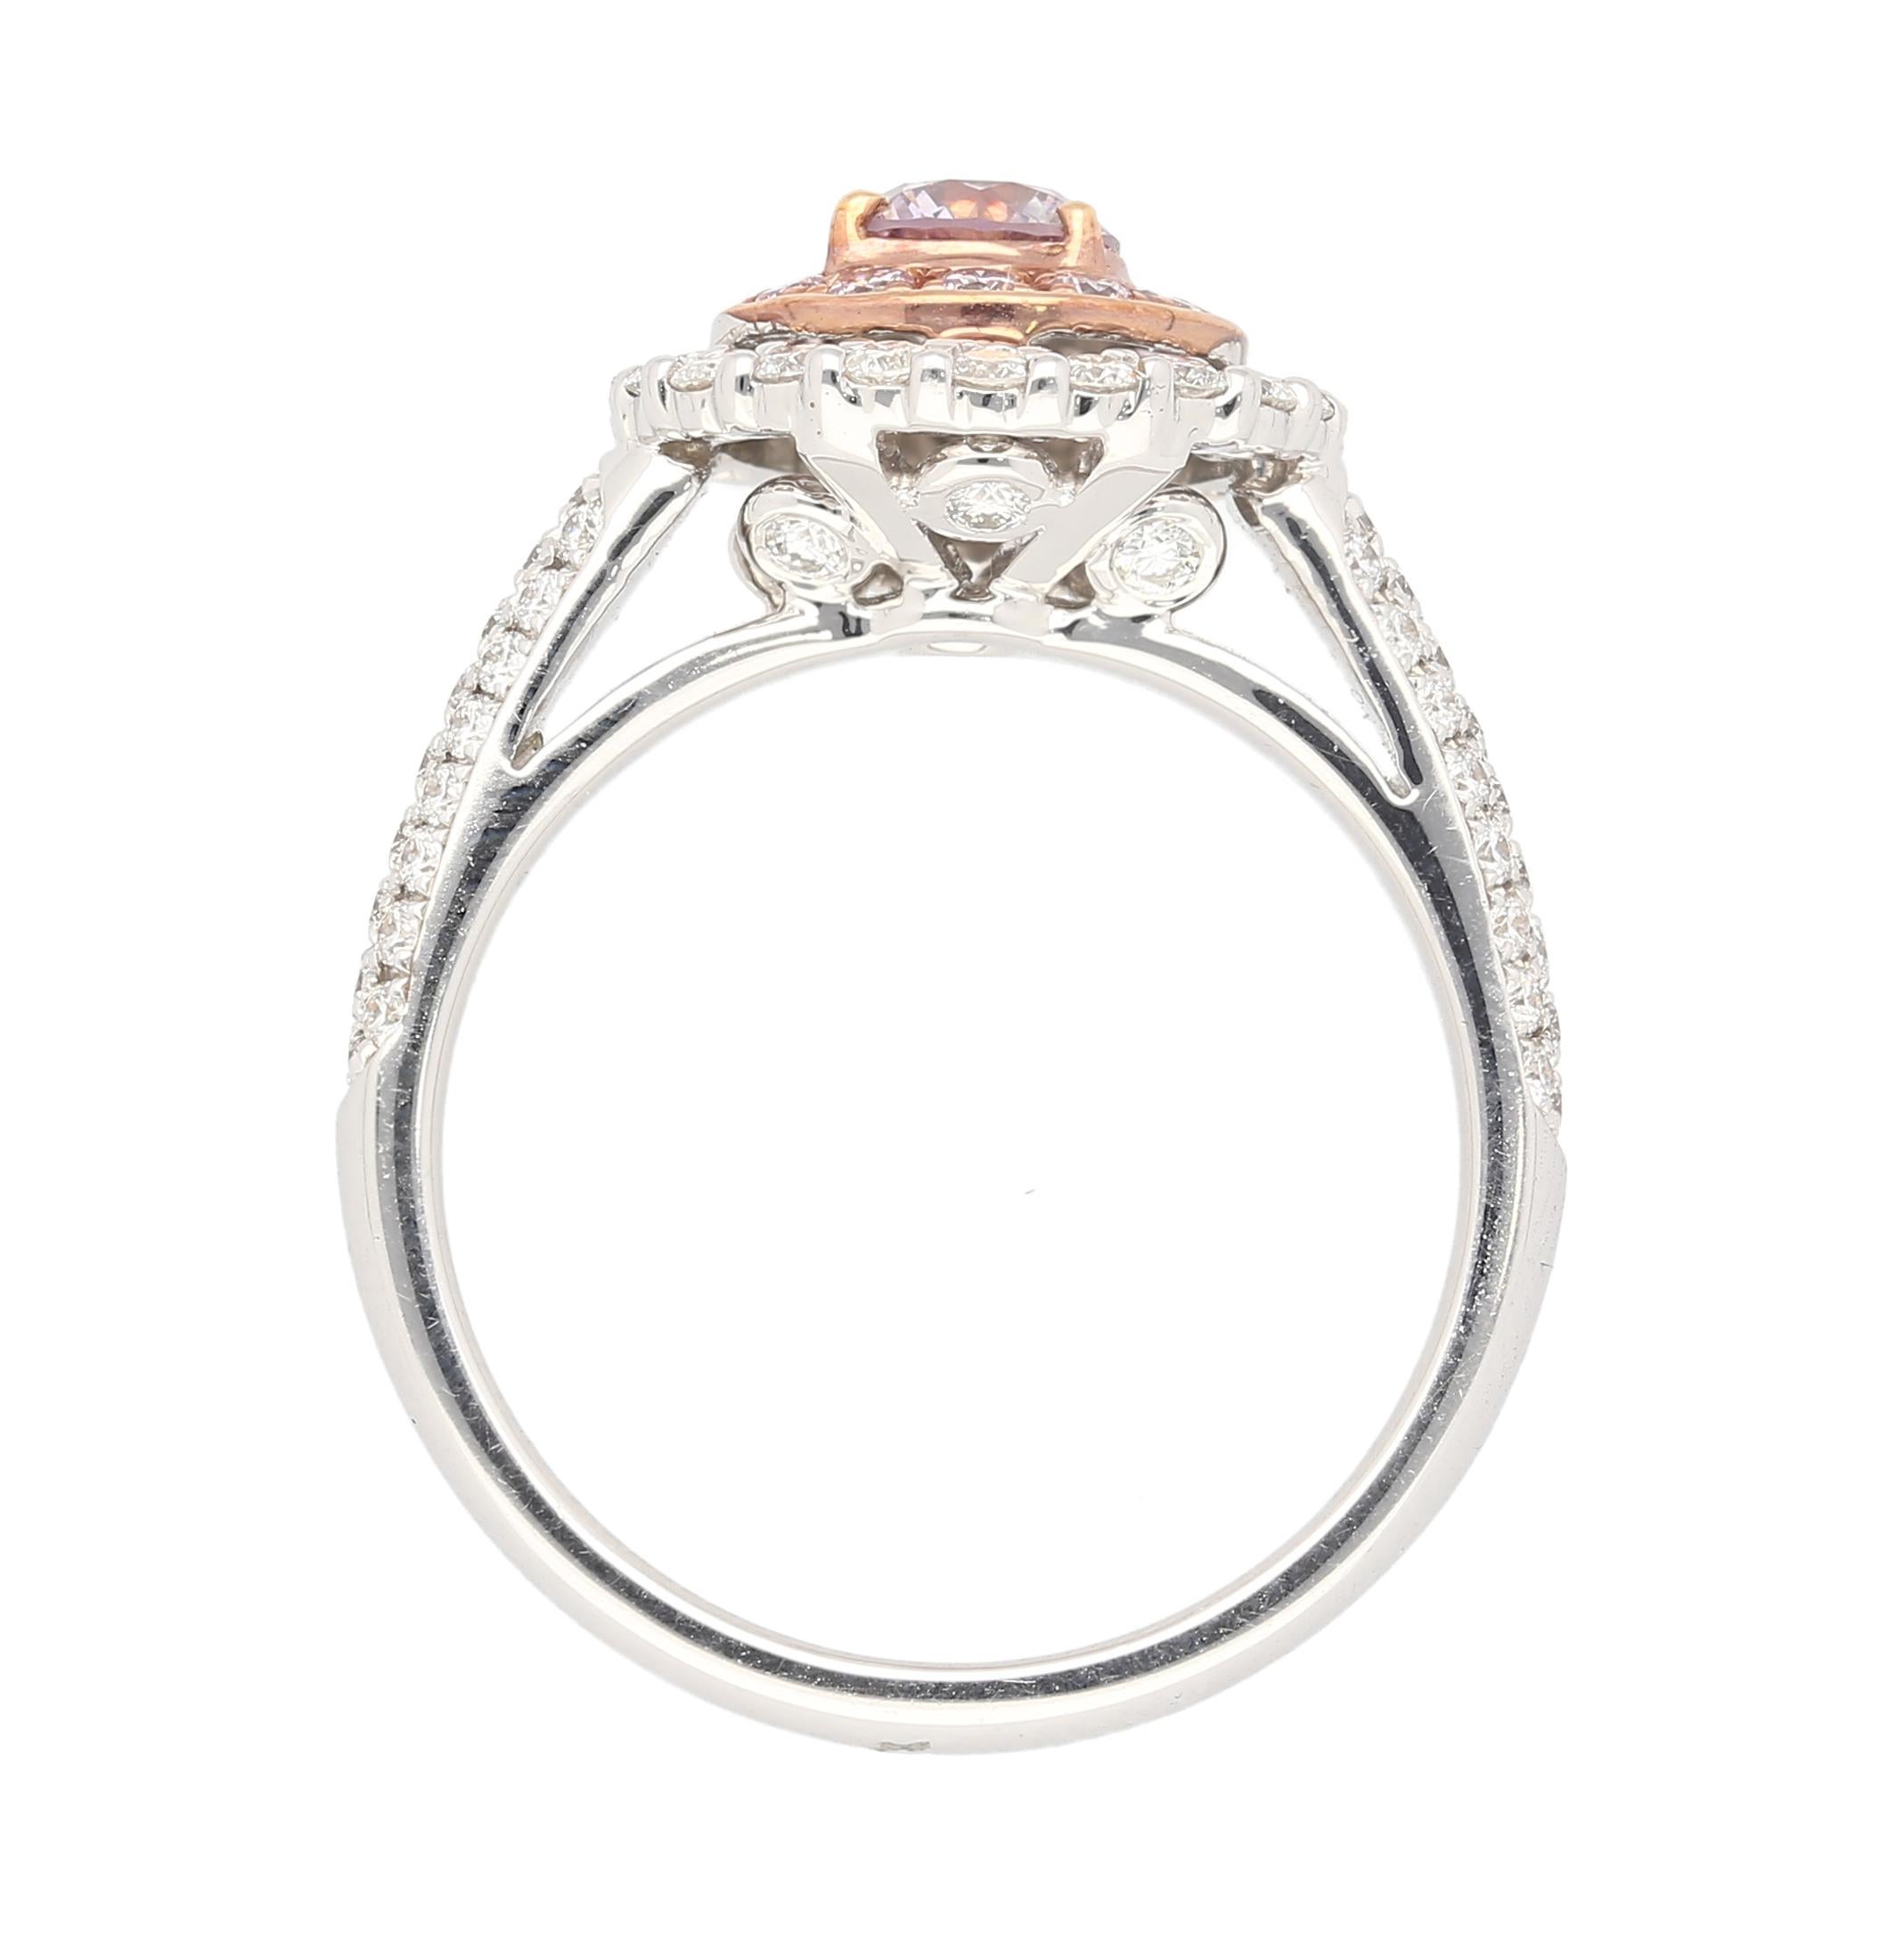 18K White and Rose Gold Ring, weighing 5.97 grams and boasting a size of 6.75. Centering an exquisite GIA Certified 0.48 carat round-brilliant diamond, displaying a rare and captivating Fancy Pink-Purple color.

The ring features a double diamond